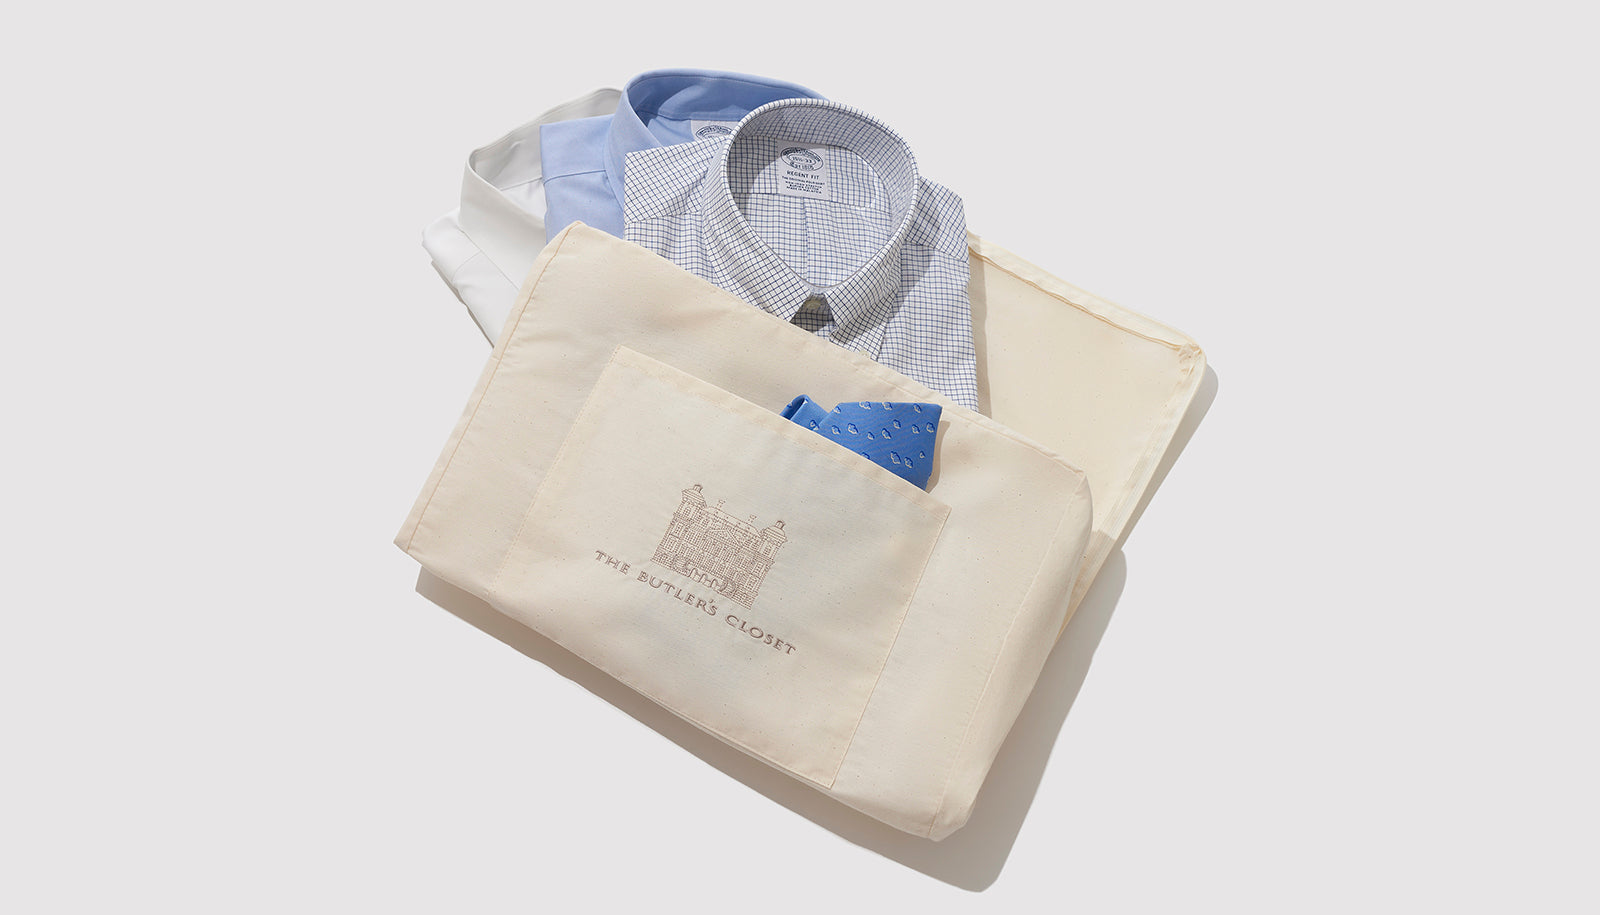 Men's Dress Shirts stored in our Deluxe Cotton Storage Bag